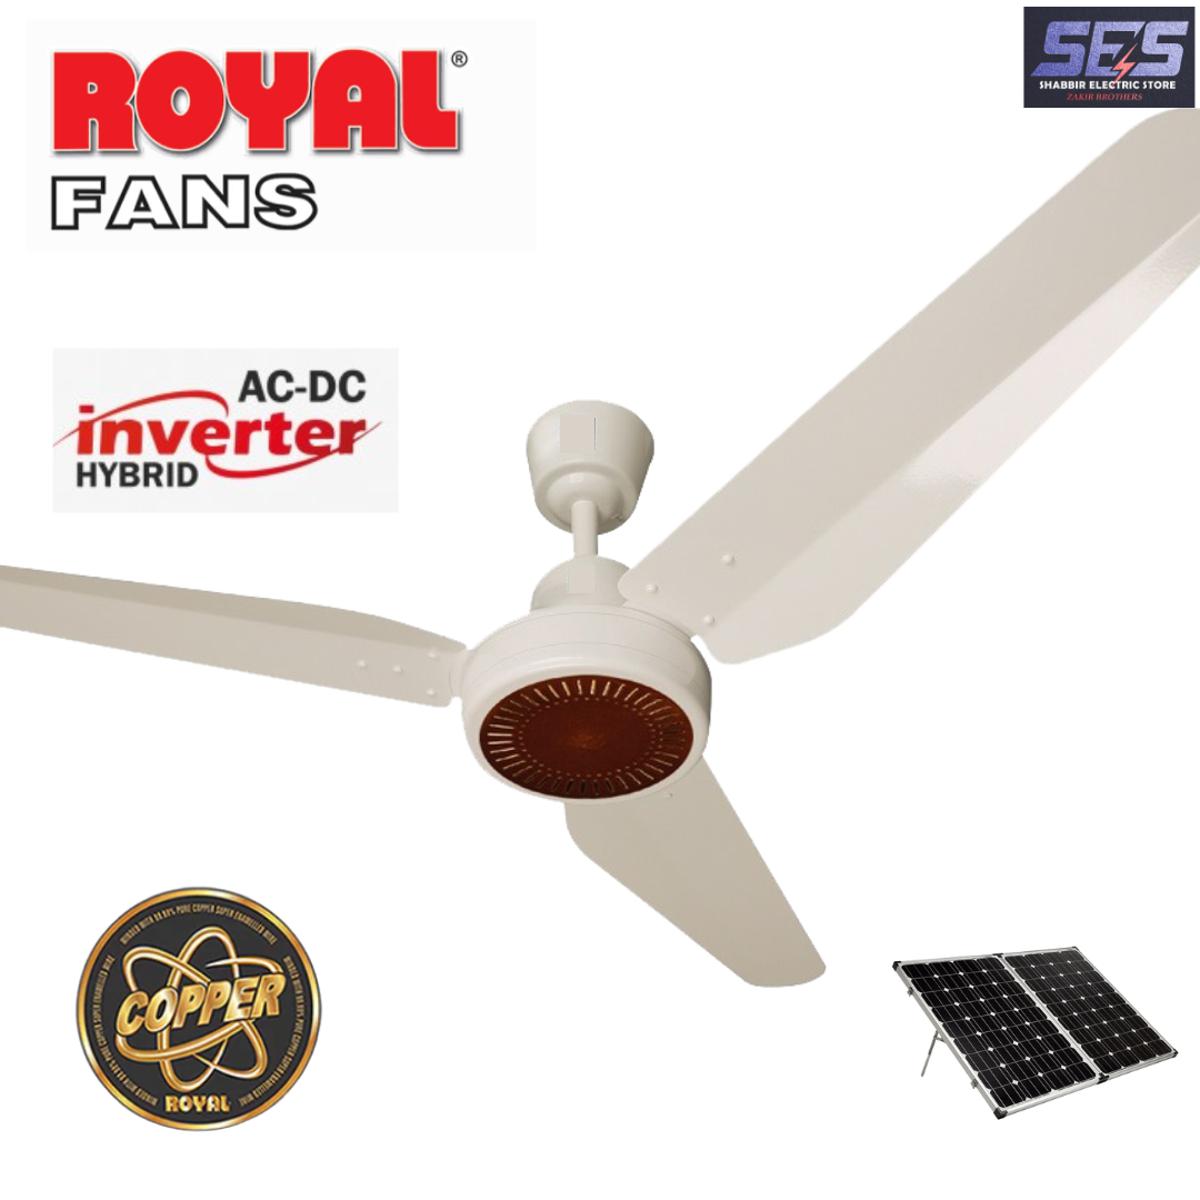 Royal Fan Ac Dc Ceiling Inverter Hybrid Remote Control Copper Winding 56 Inches One Click Ping